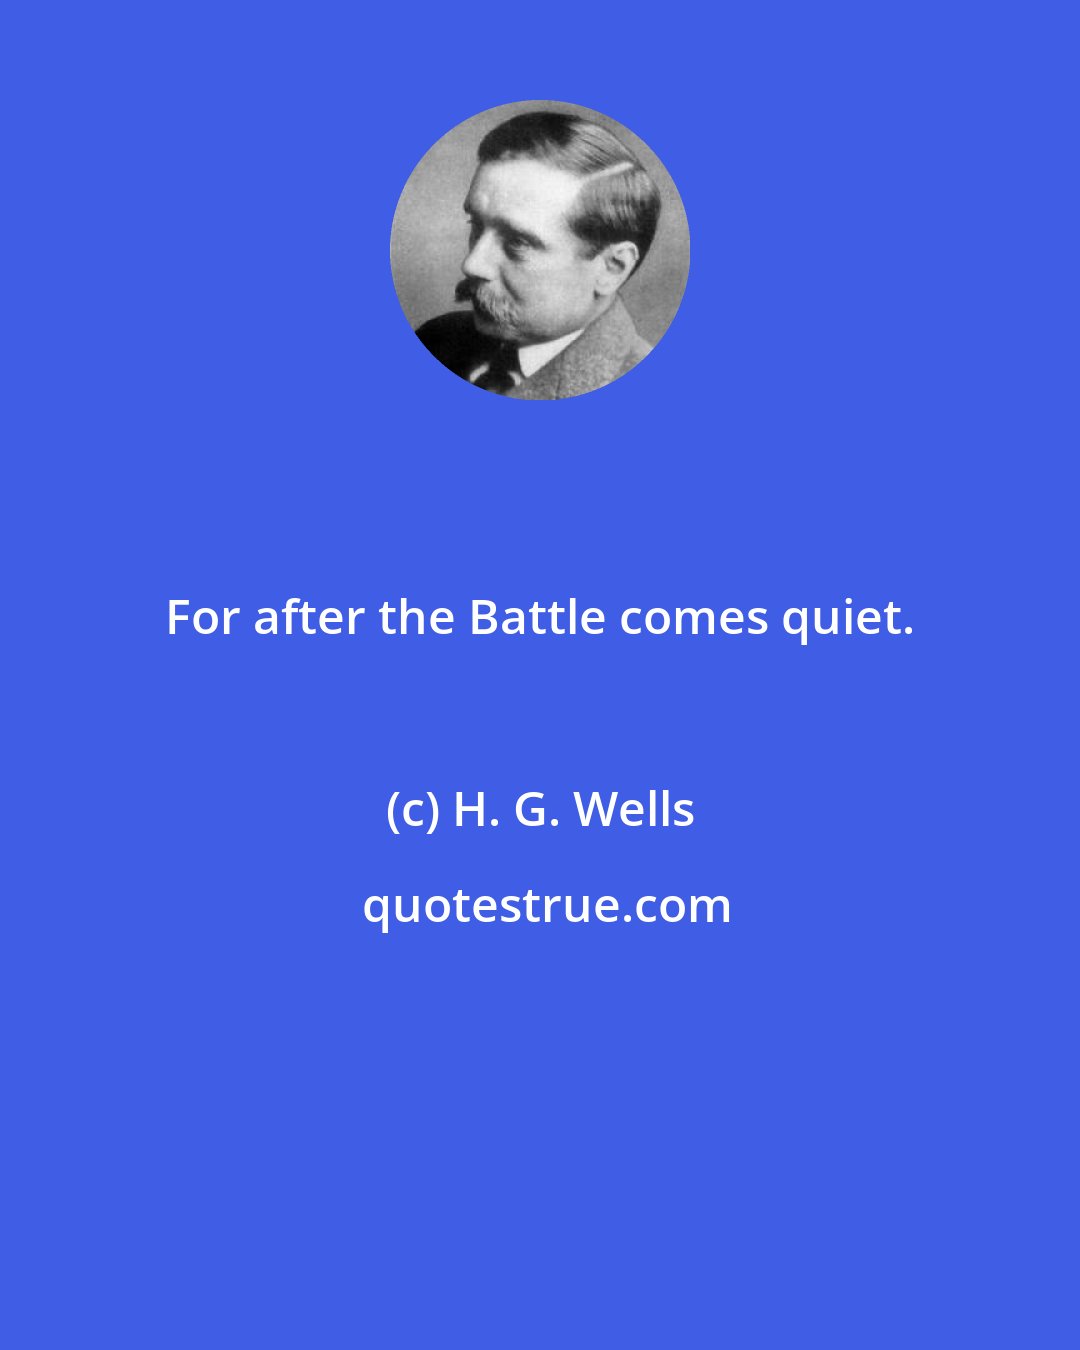 H. G. Wells: For after the Battle comes quiet.